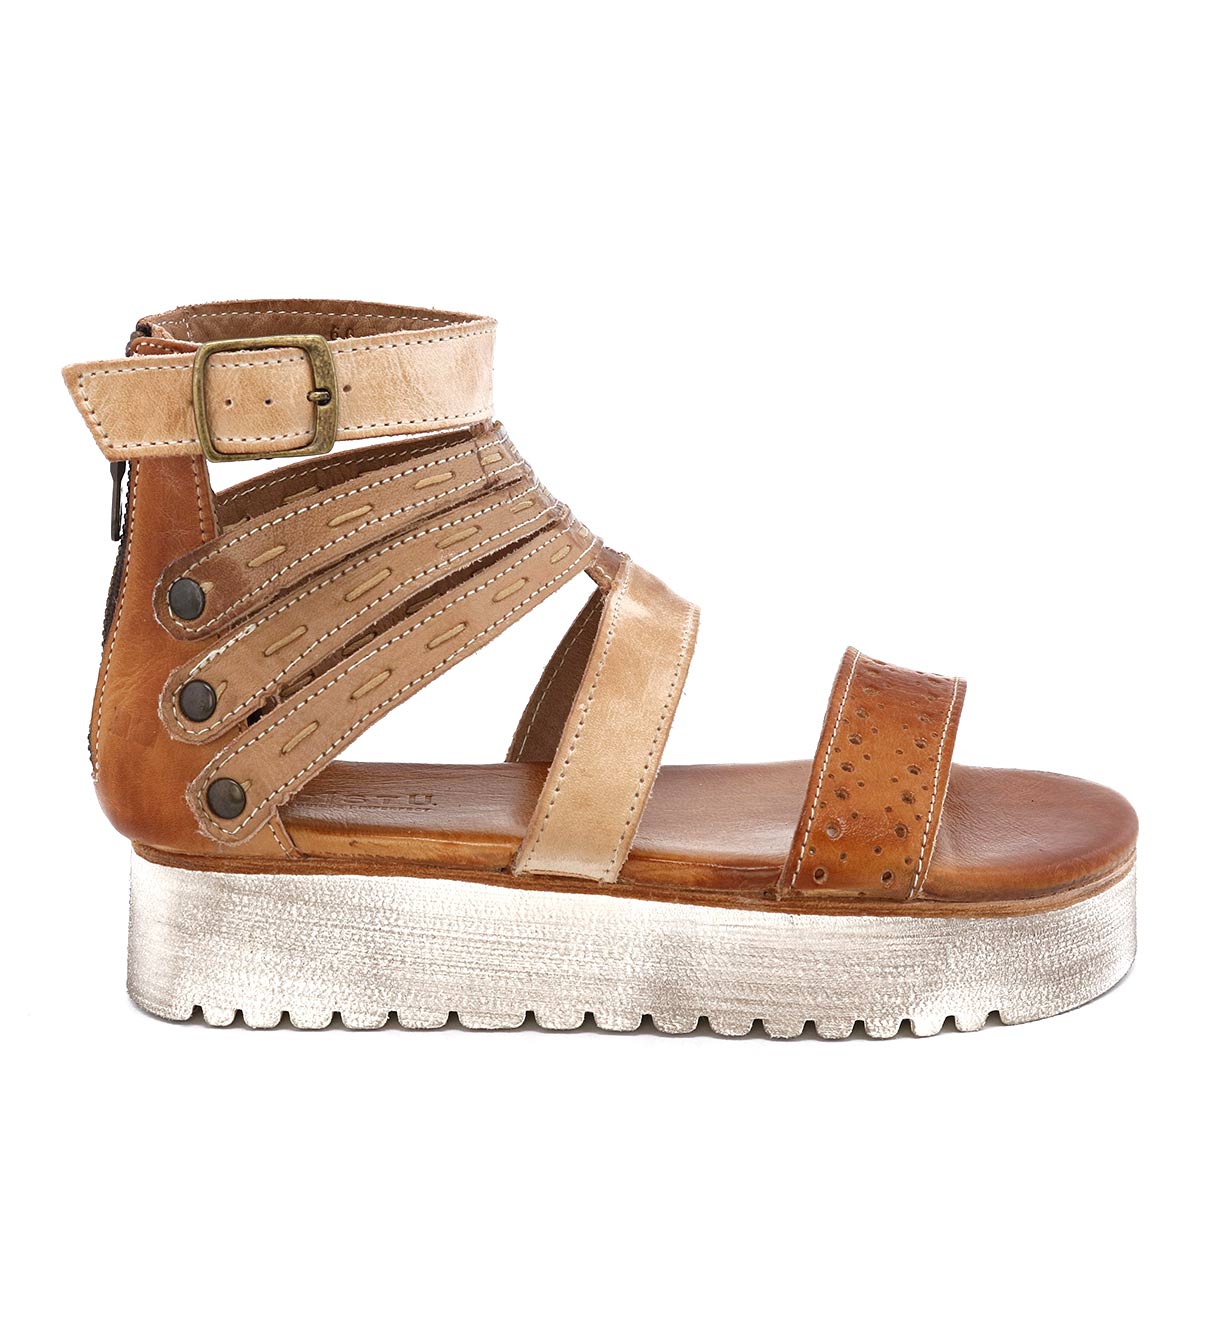 An Artemia sandal by Bed Stu, with straps and a platform.